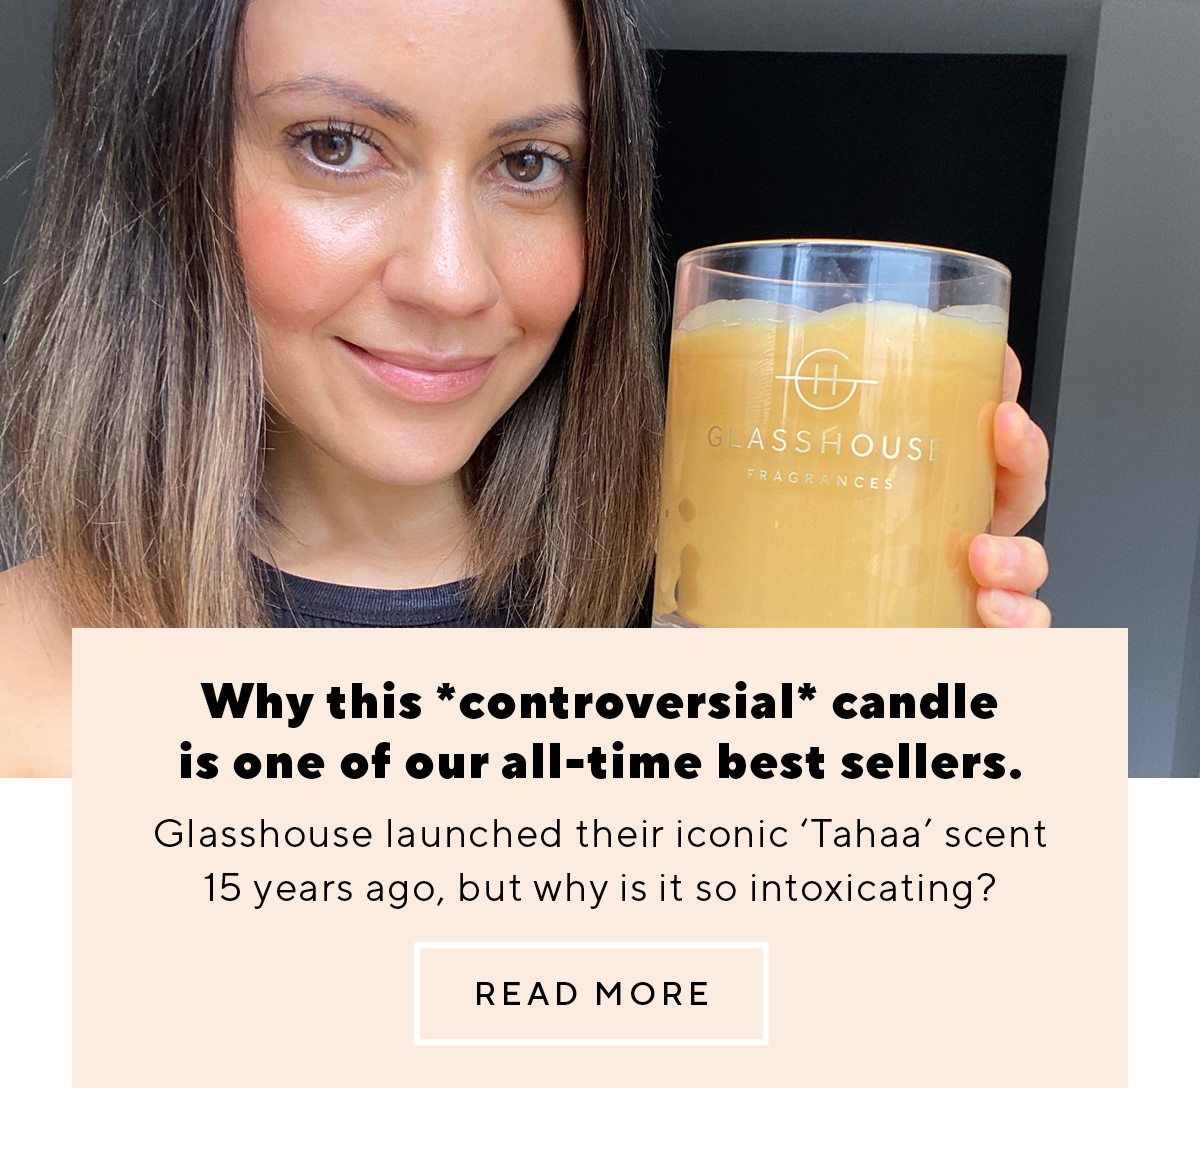 Why this *controversial* candle is one of our all-time best sellers.